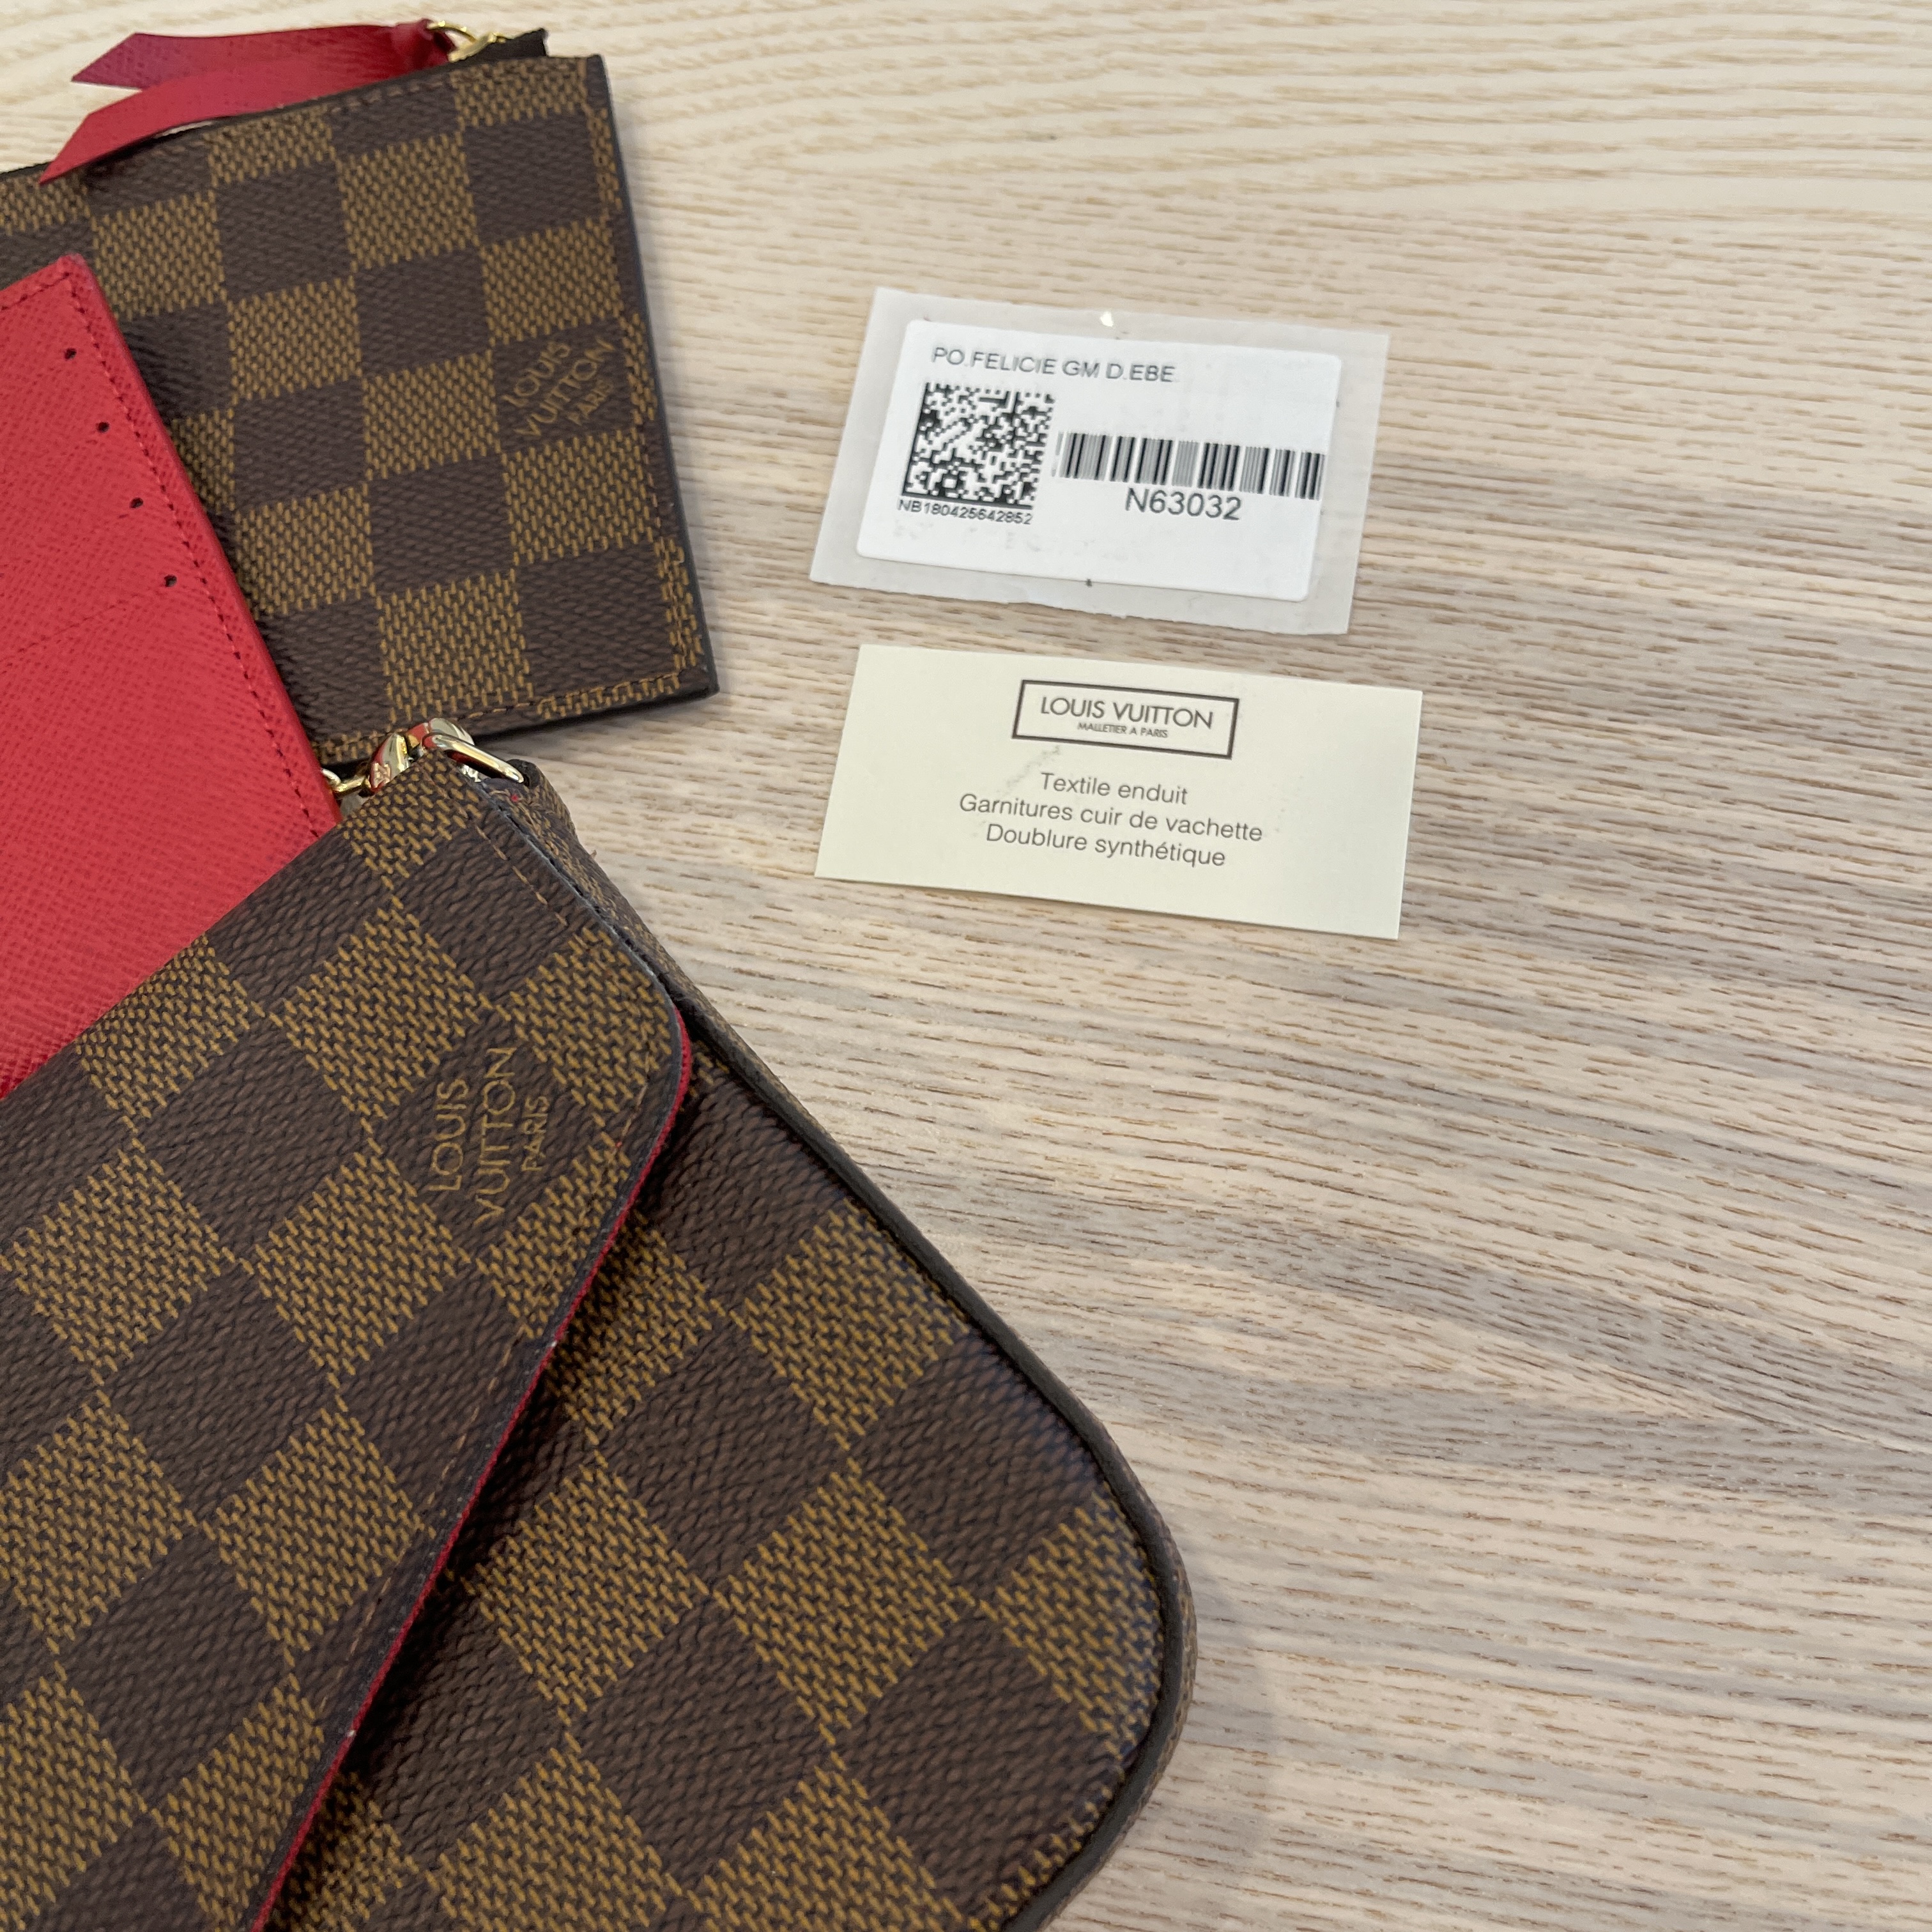 Félicie Pochette Damier Ebene Canvas - Wallets and Small Leather